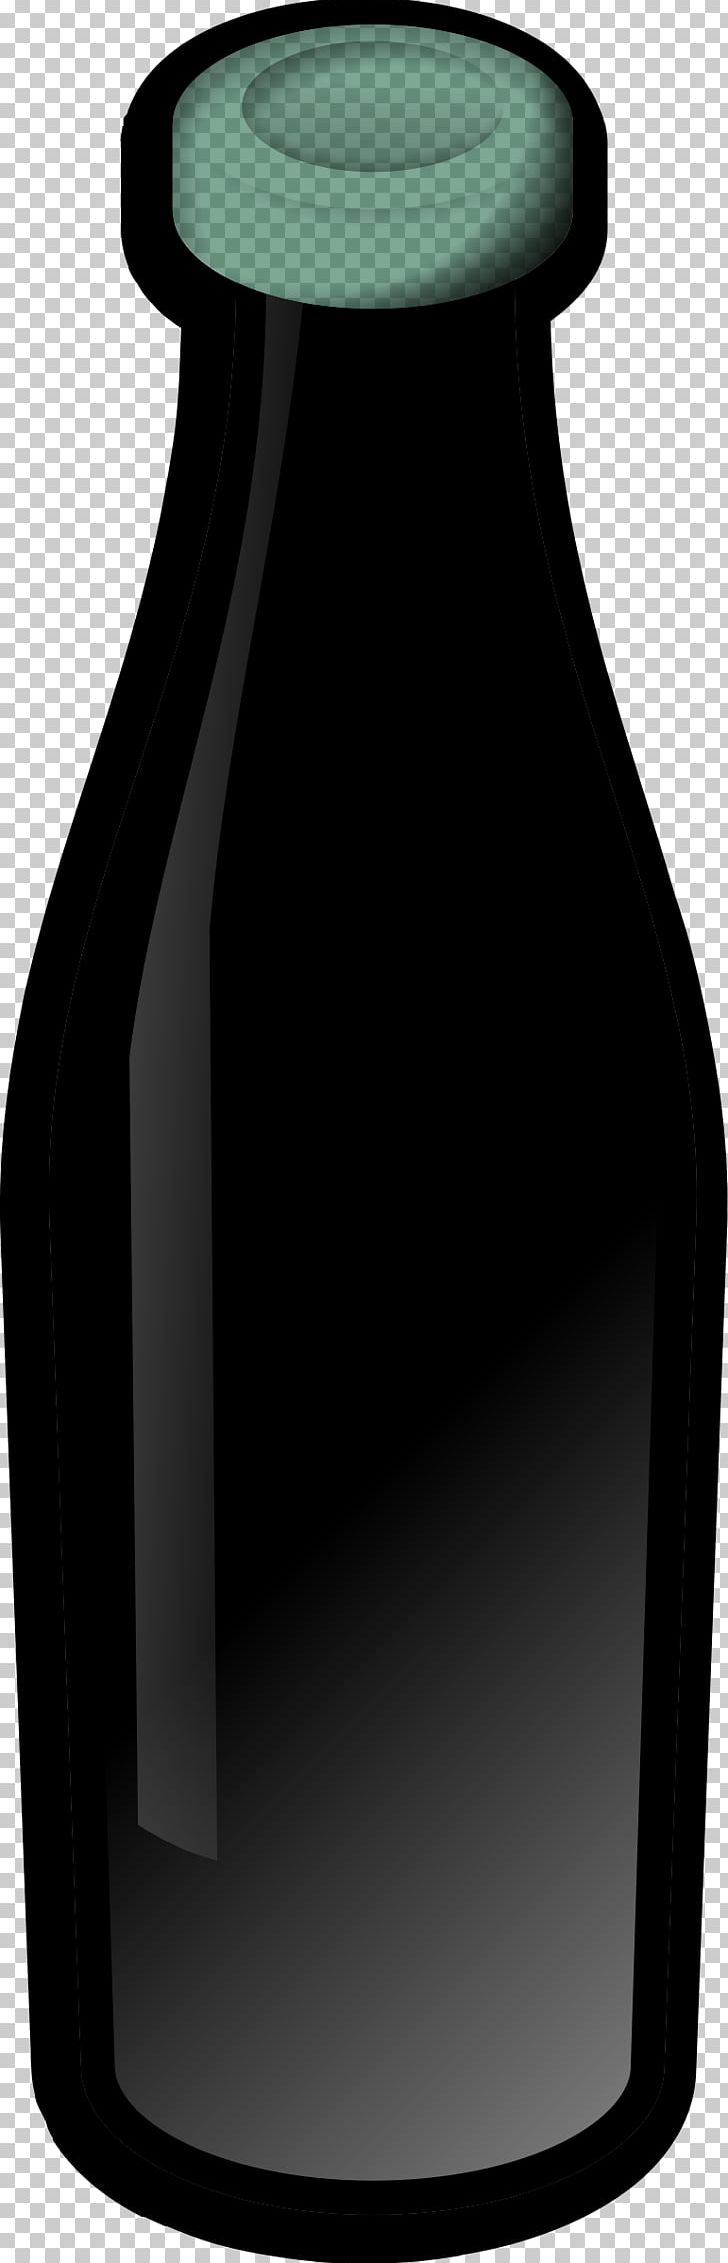 Glass Bottle Glass Recycling PNG, Clipart, Bottle, Drinkware, Glass, Glass Bottle, Glass Melting Furnace Free PNG Download